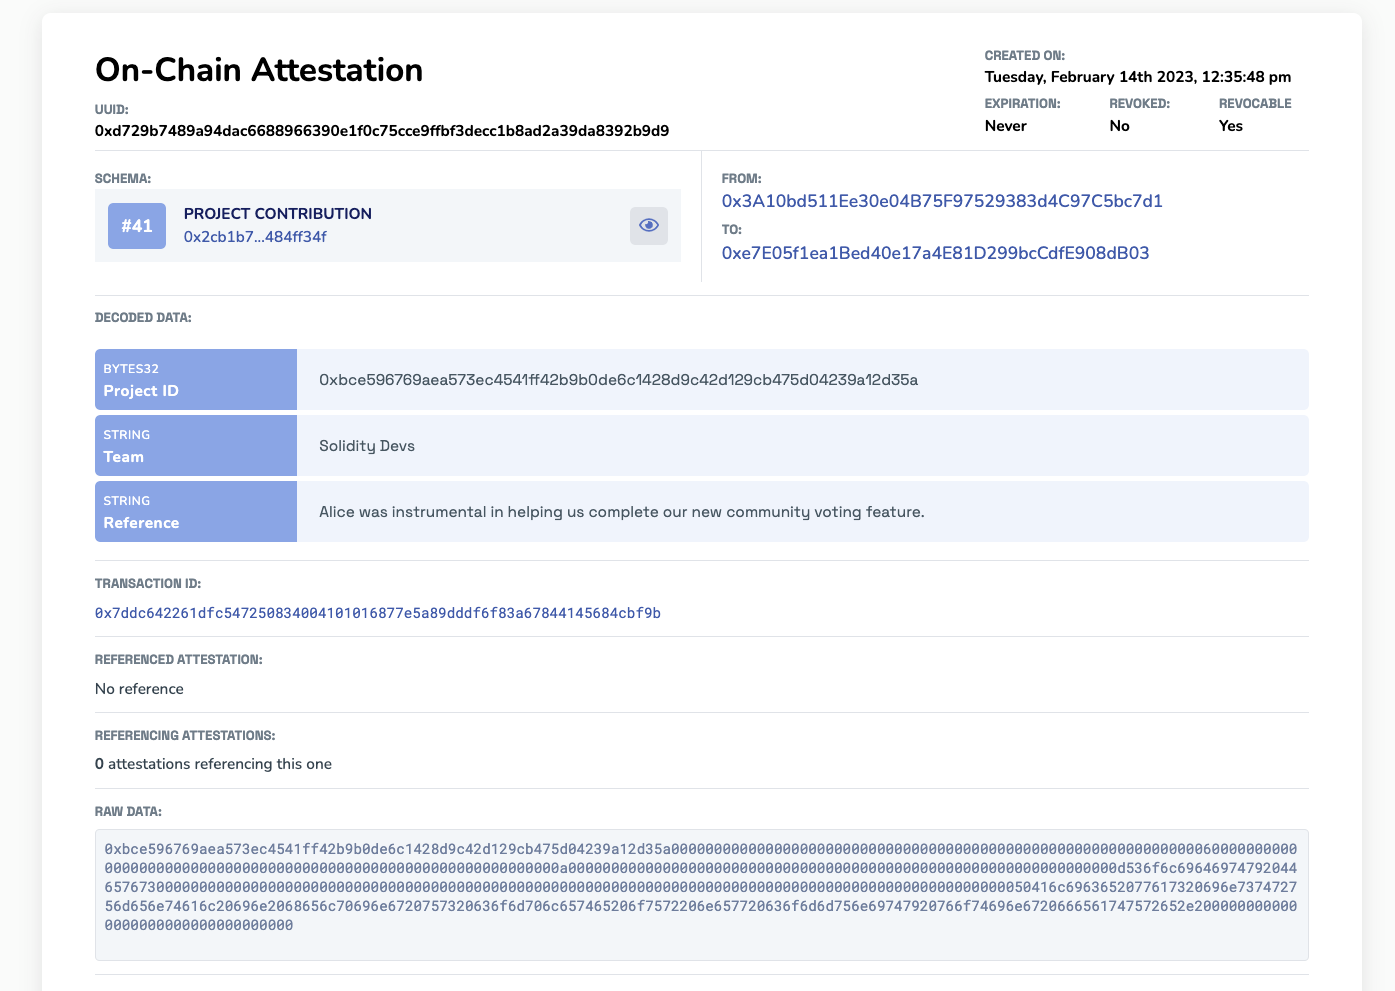 On-chain attestation of a DAO attesting to Alice's contribution to a critical team project.